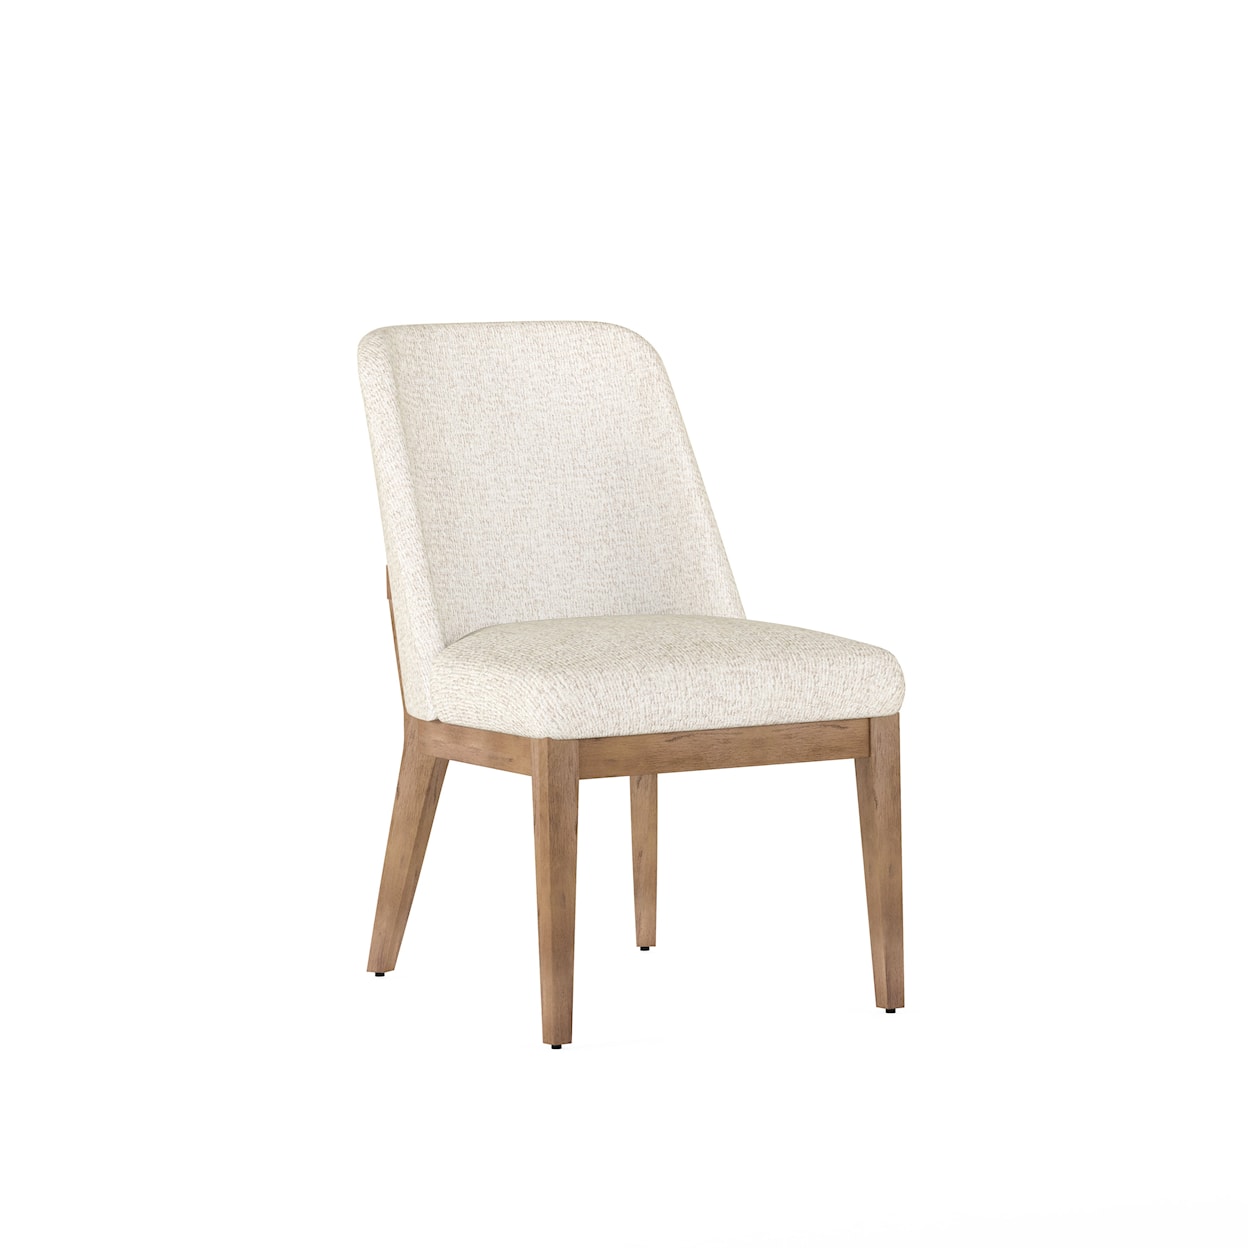 A.R.T. Furniture Inc Portico Two-Tone Upholstered Side Chair